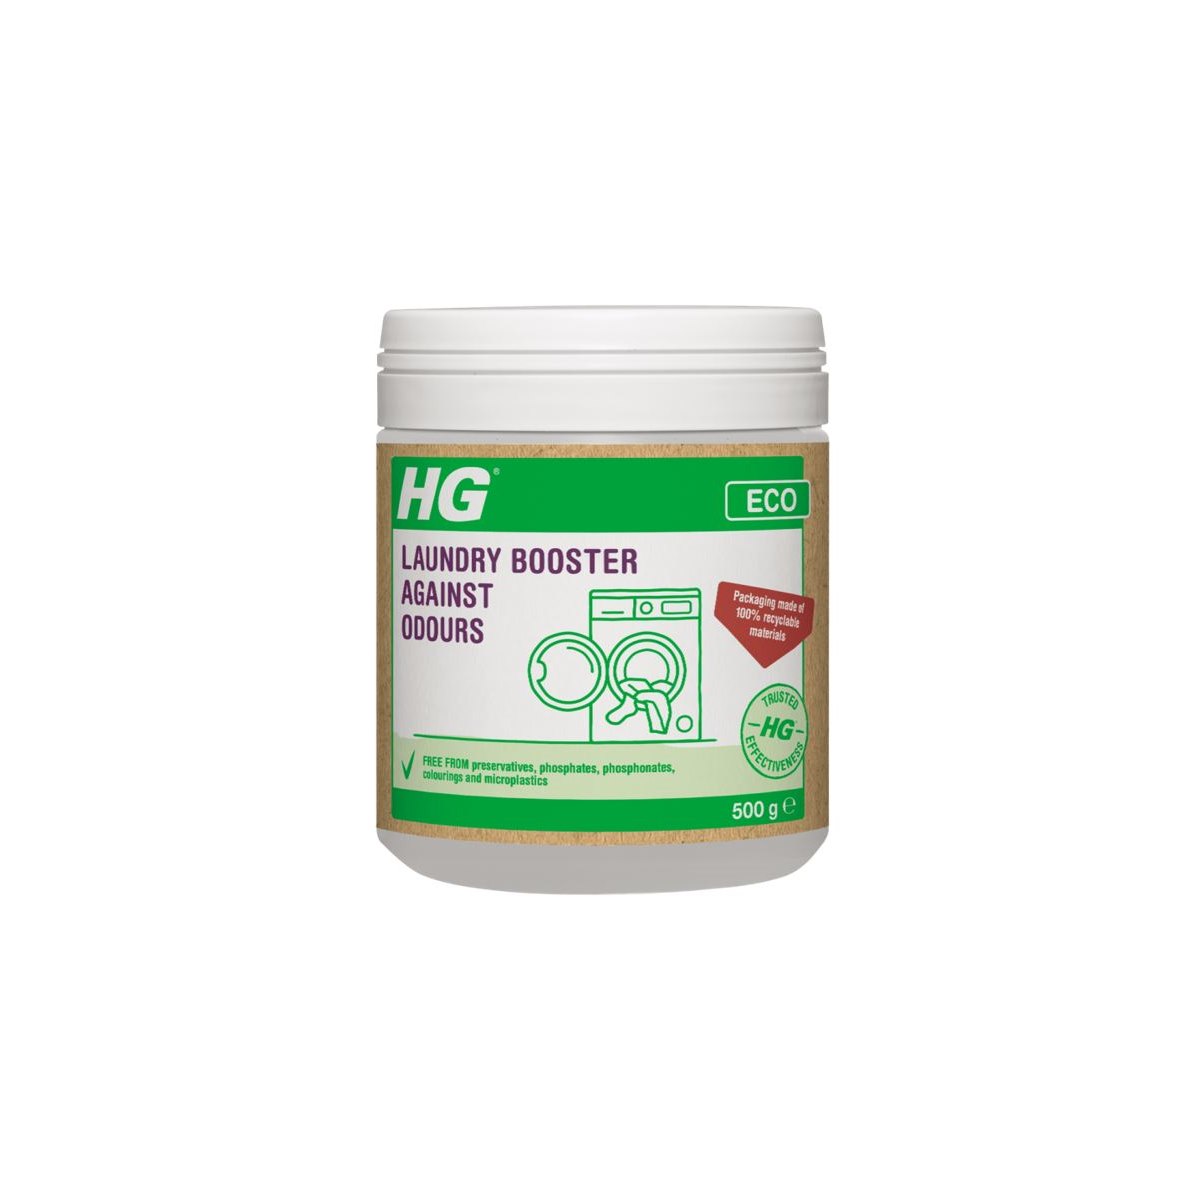 HG Eco Laundry Booster Against Odours 500g